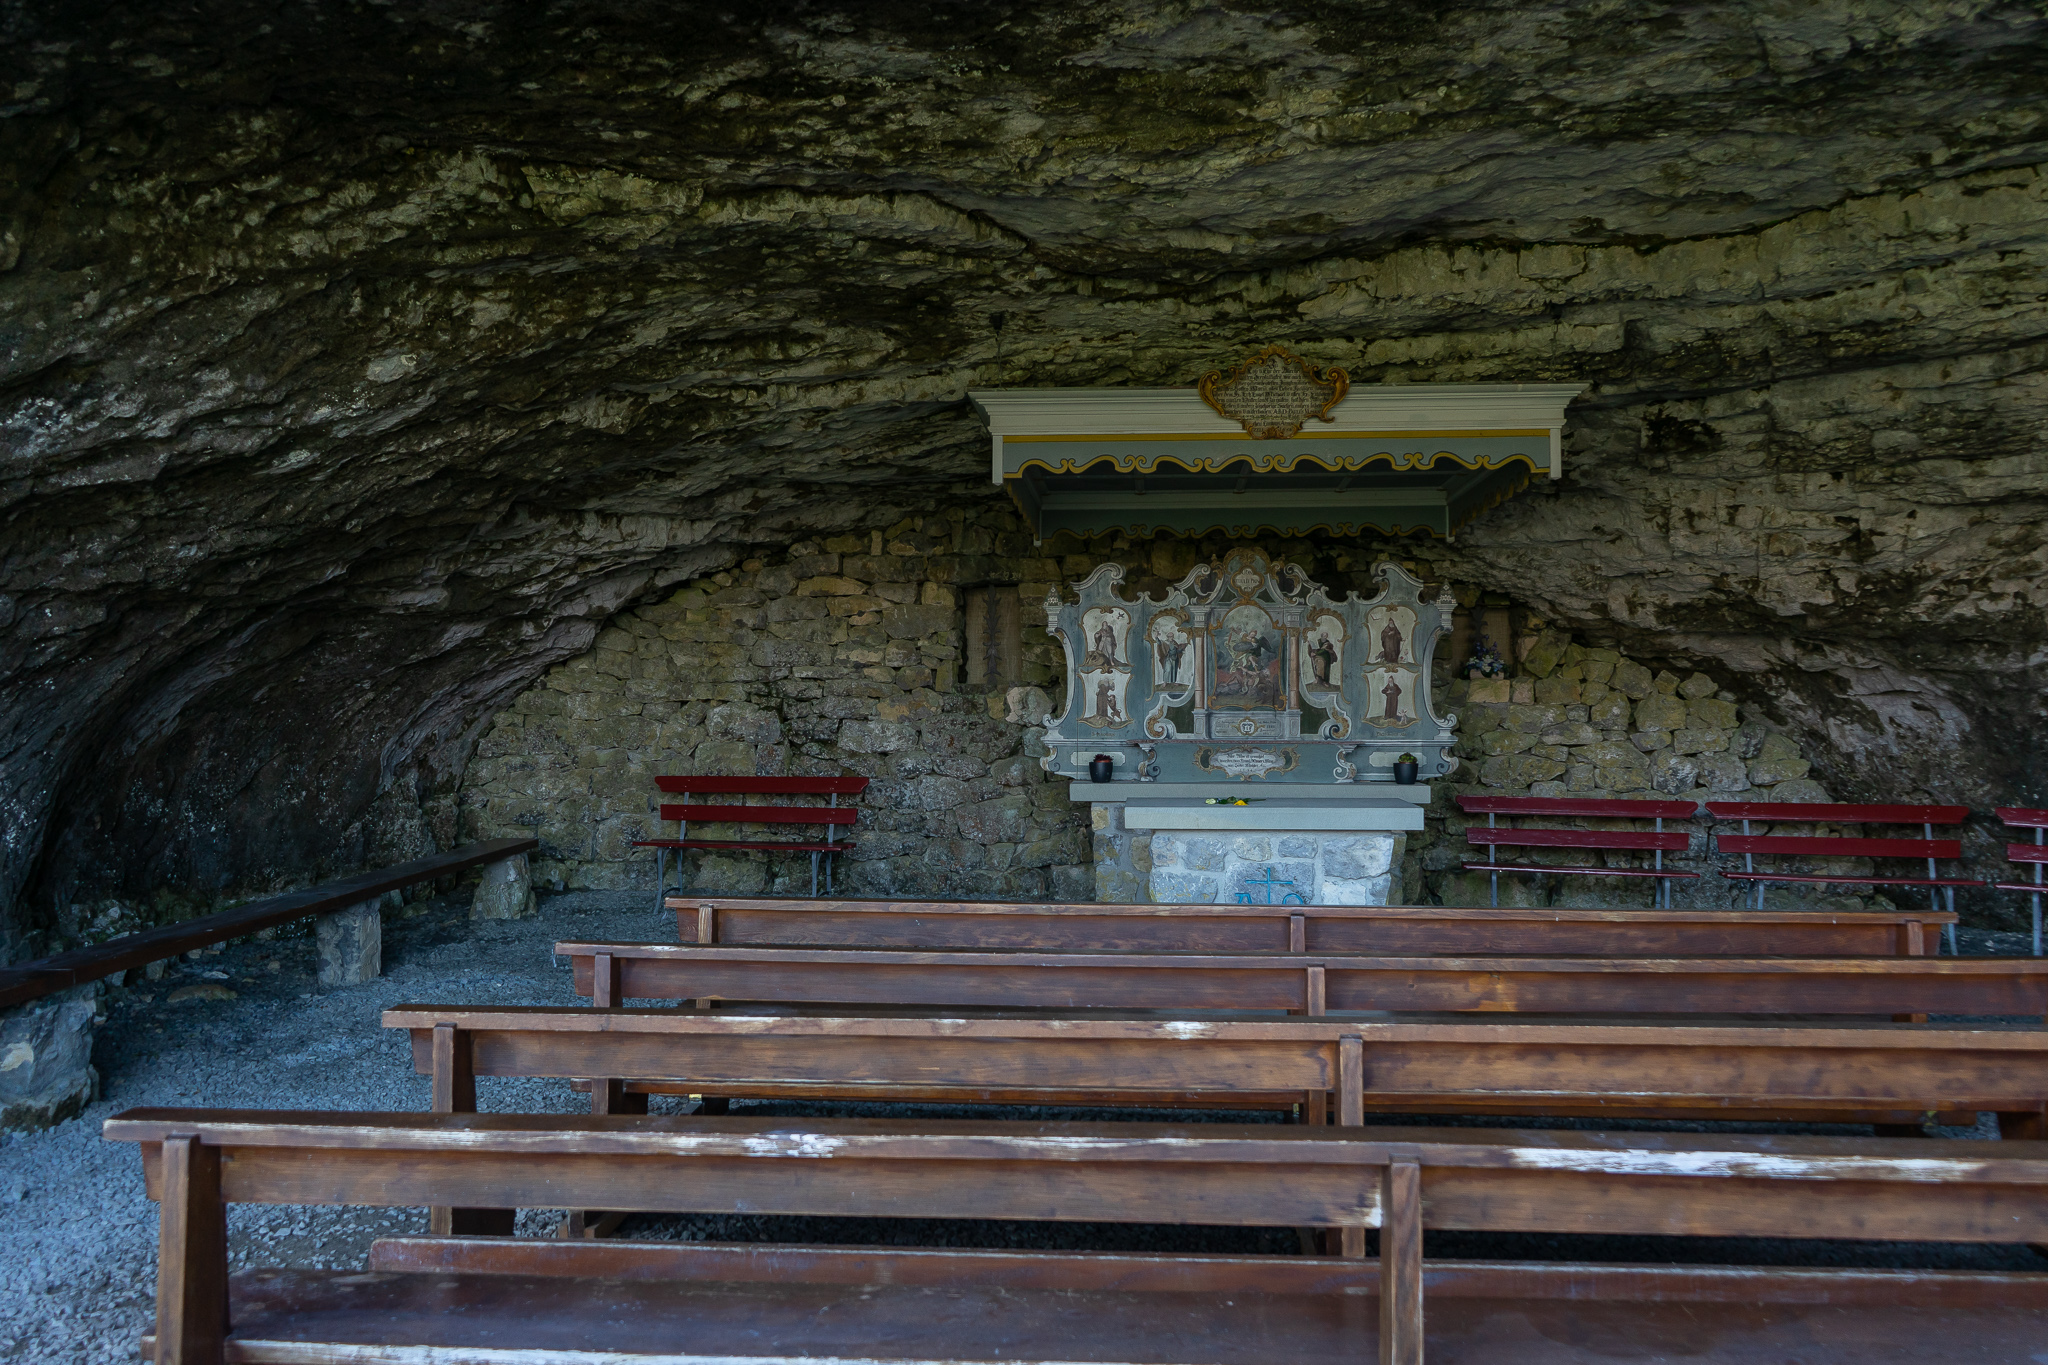 A small chapel with wooden benches inside a cave